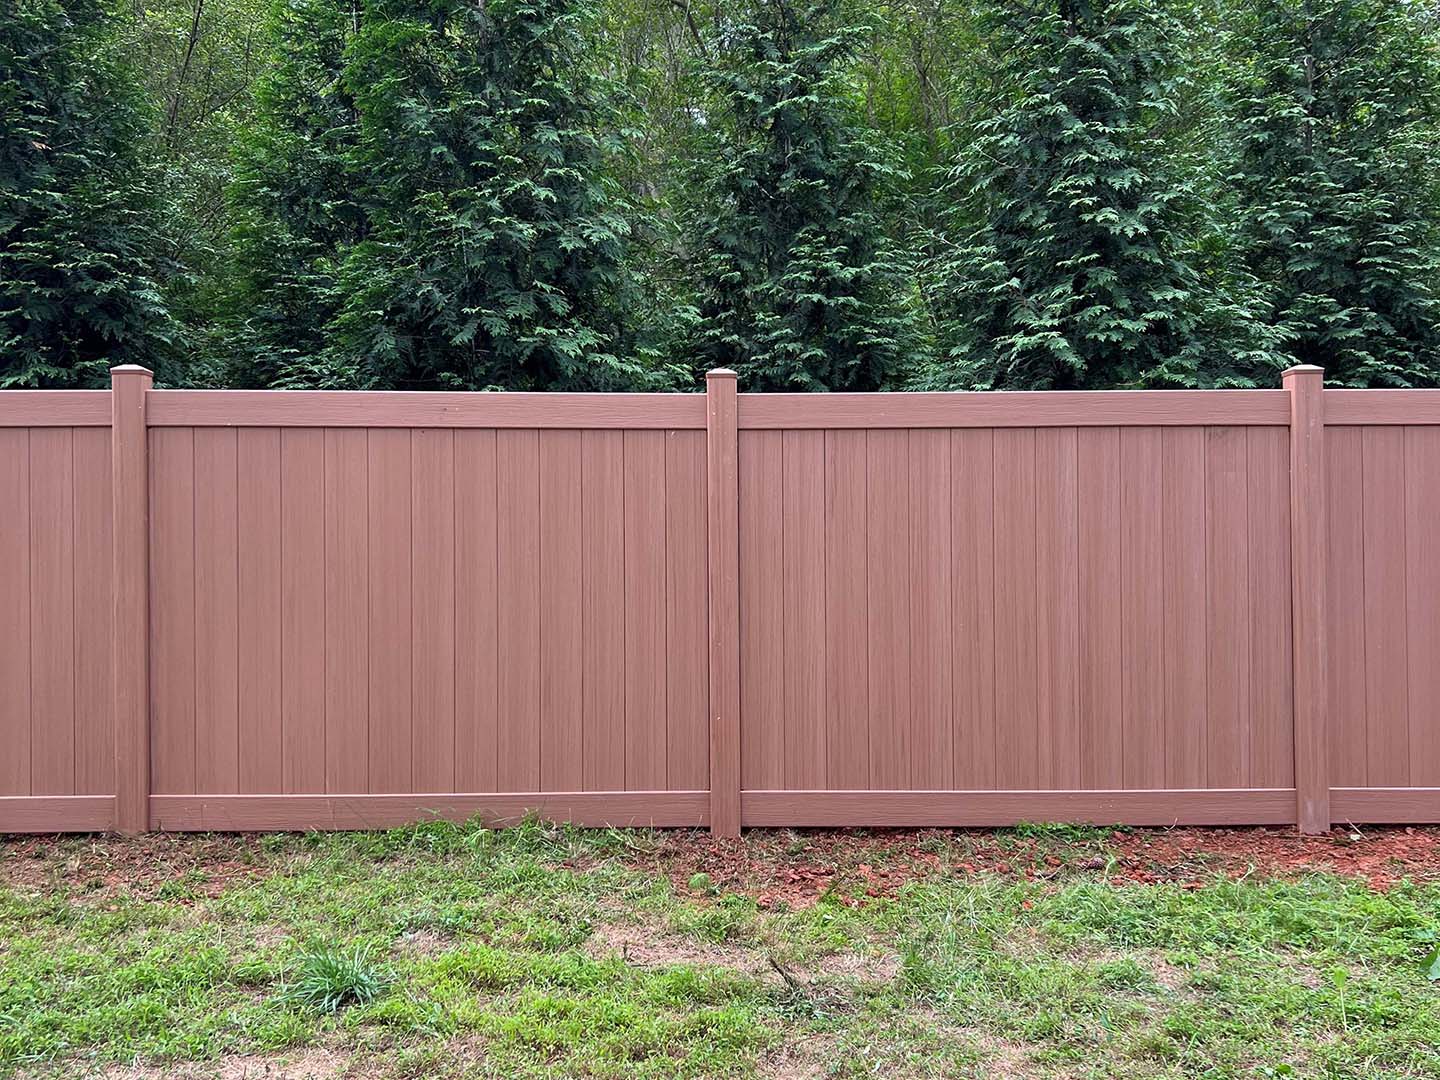 Photo of a Youngsville NC vinyl fence